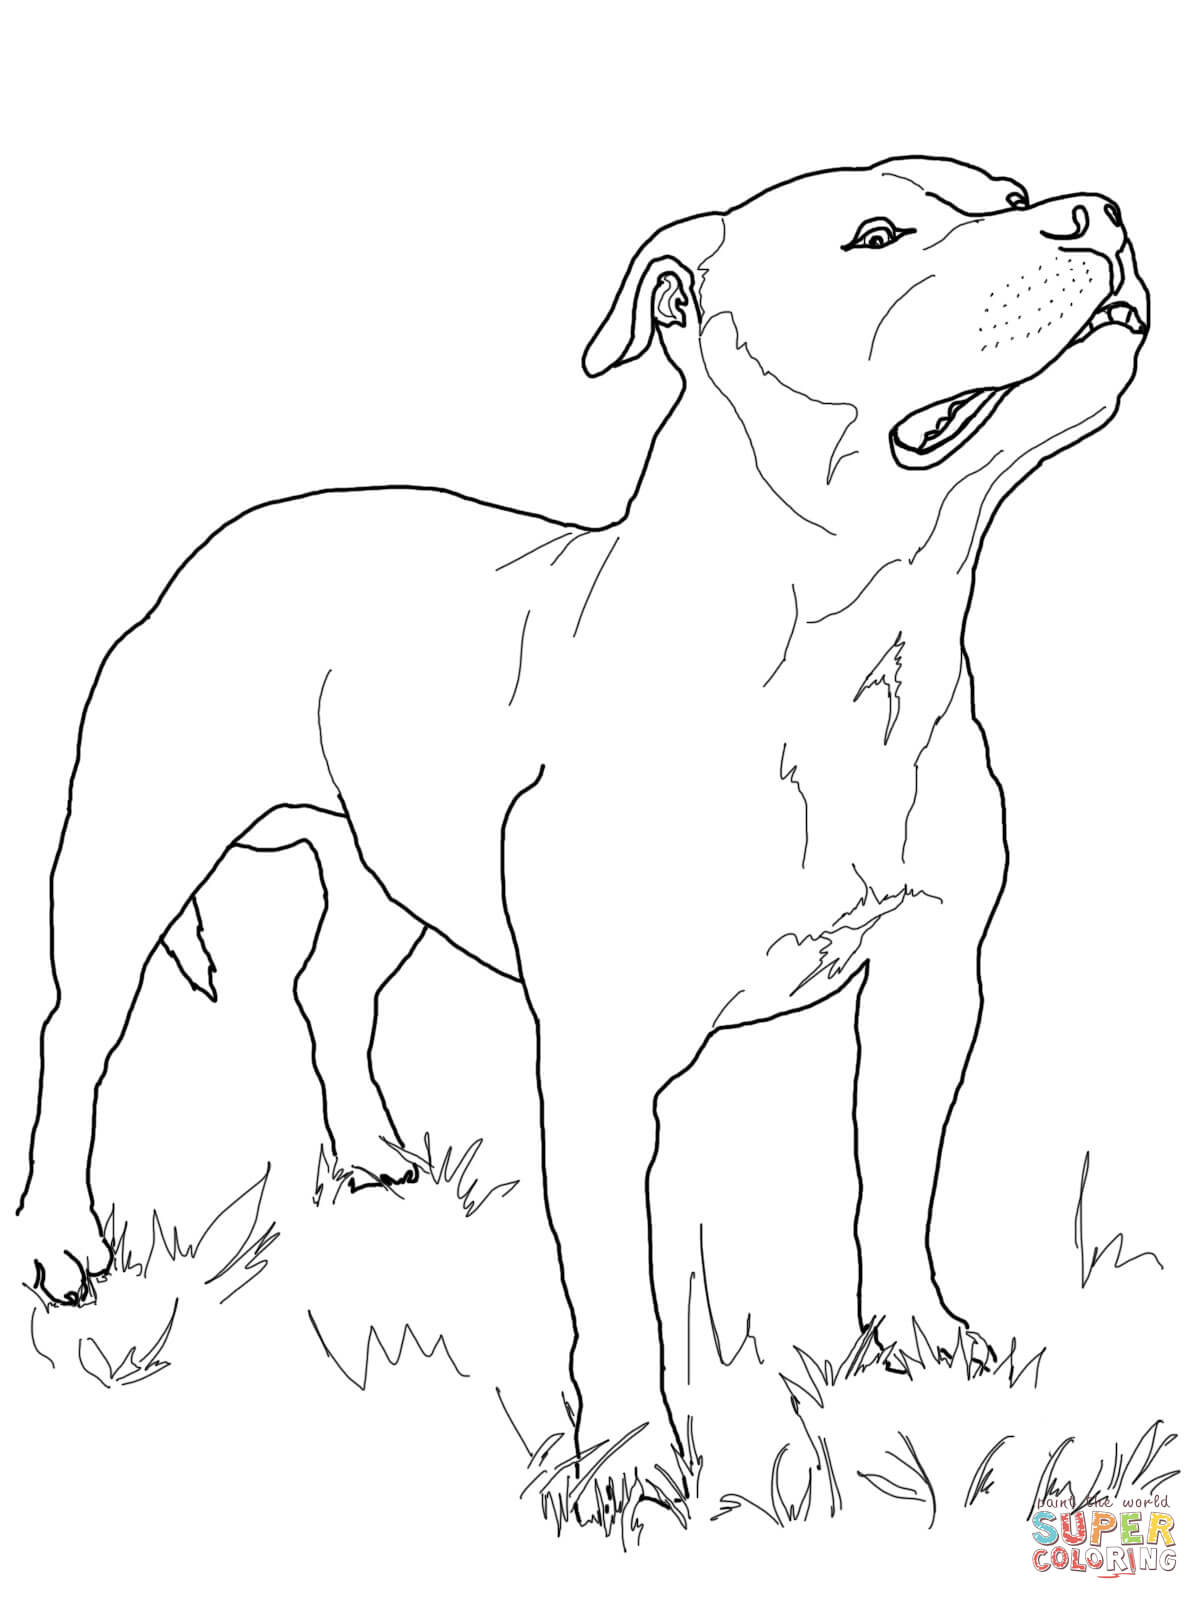 Staffordshire Bull Terrier coloring page